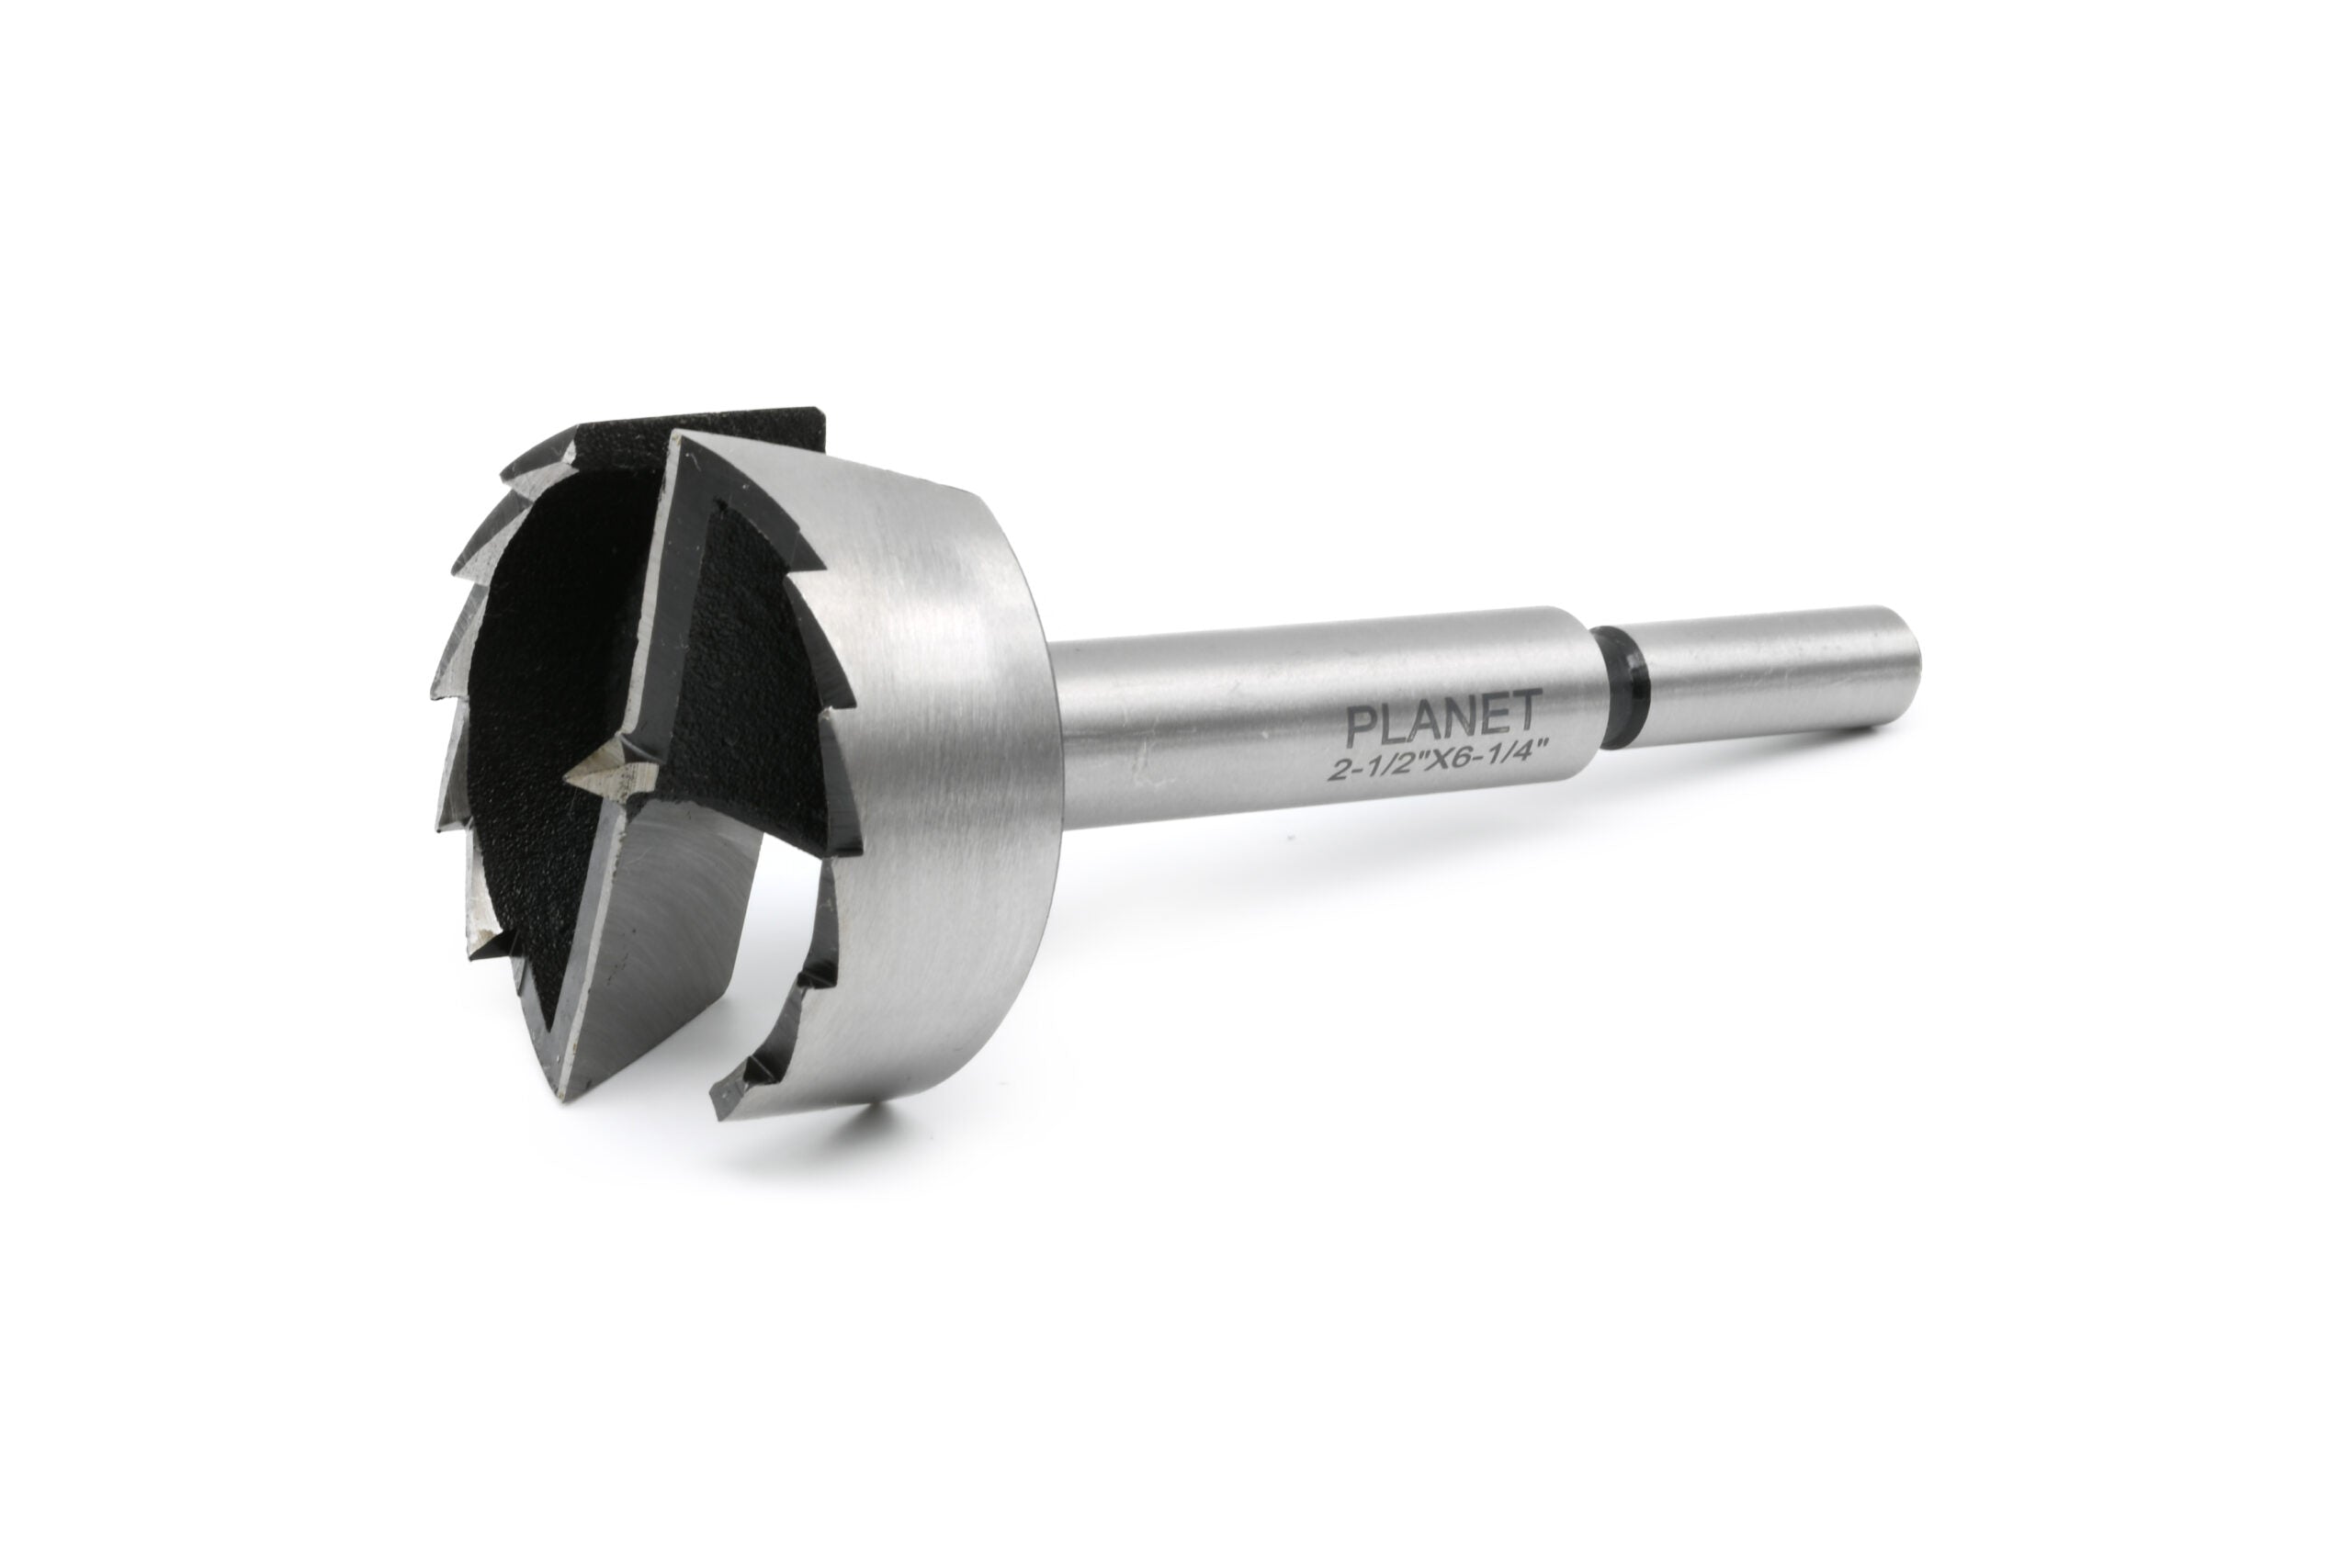 Planet Long Series Saw Tooth Forstner Bit 2-1/2" 63.5mm